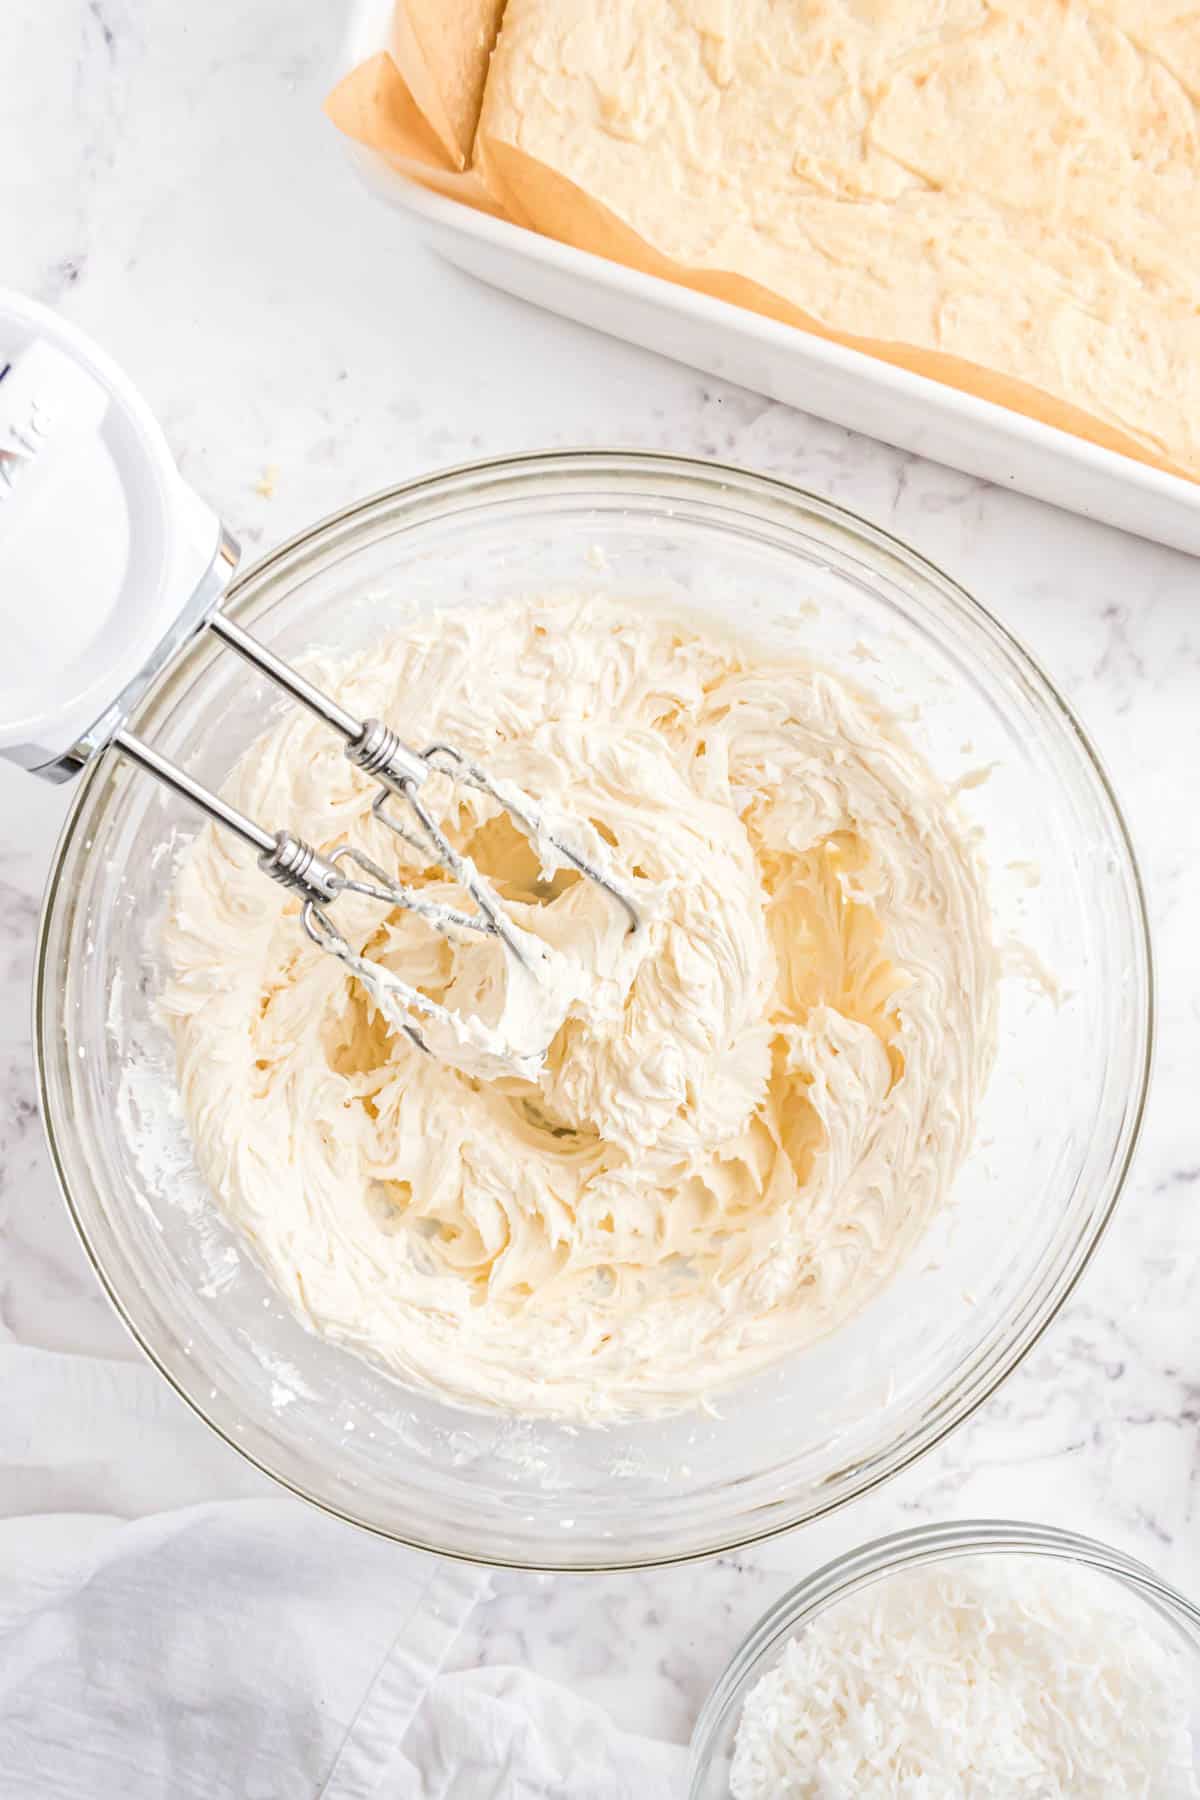 A hand mixer beating frosting in a glass bowl.